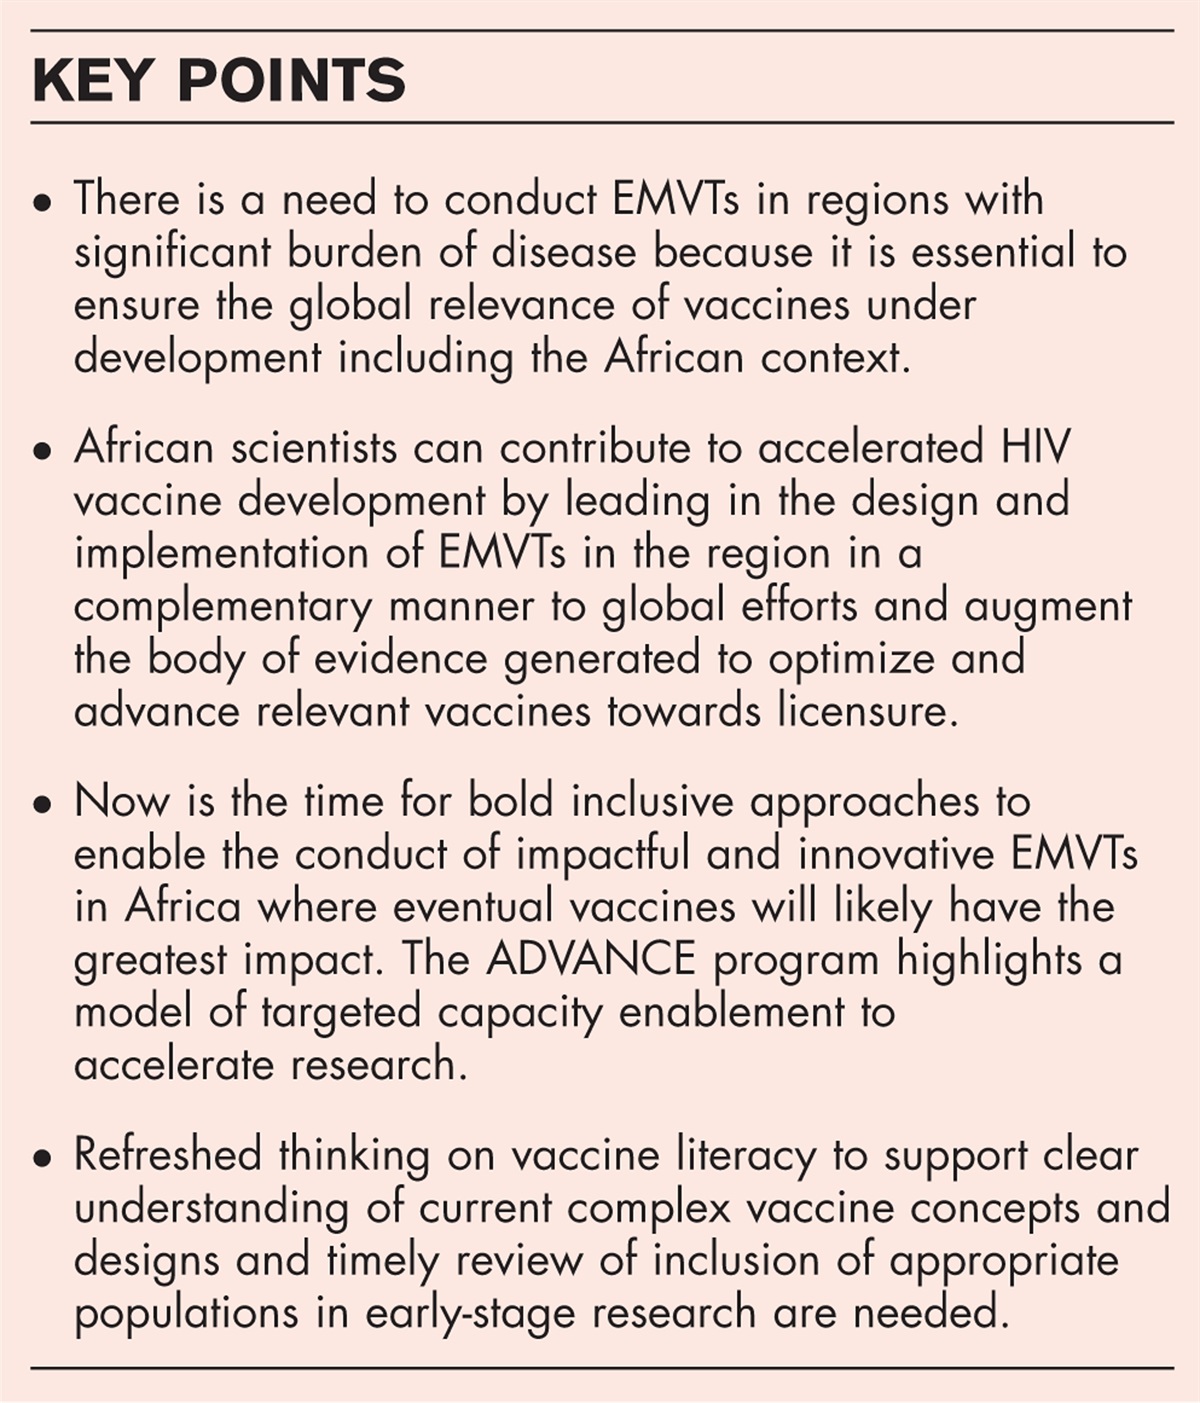 Accelerating HIV vaccine development through meaningful engagement of local scientists and communities